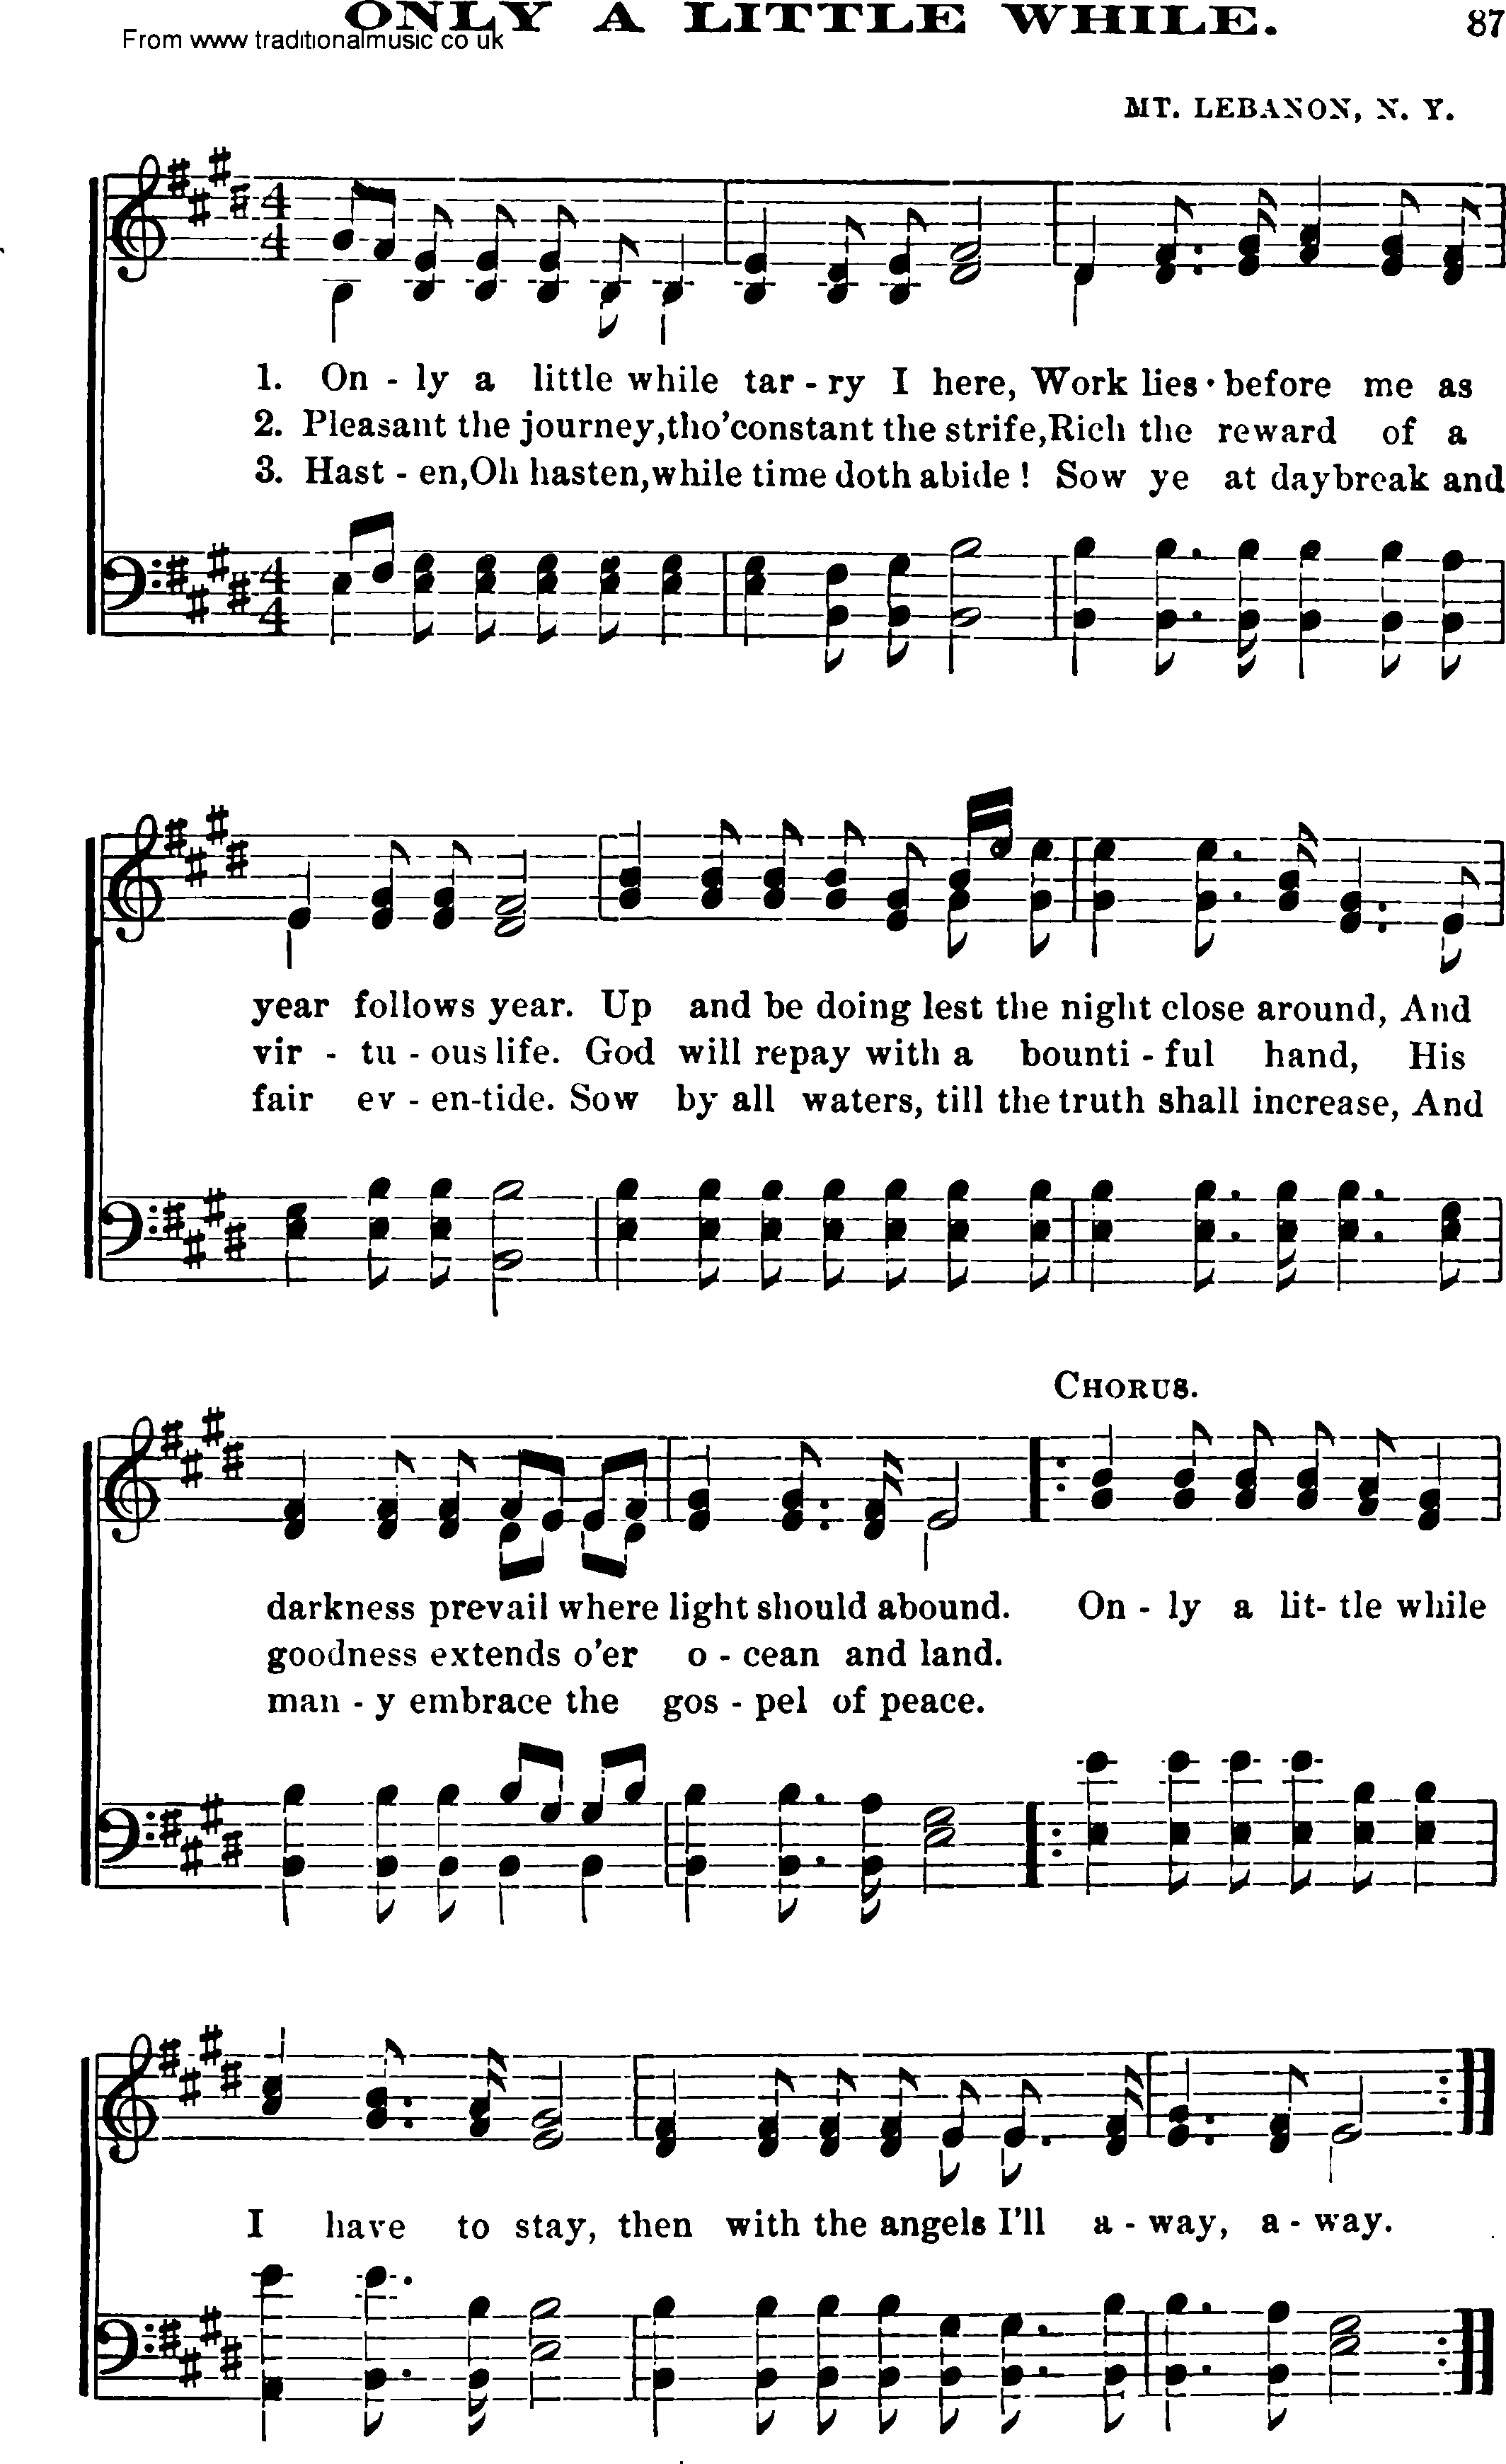 Shaker Music collection, Hymn: Only A Little While, sheetmusic and PDF